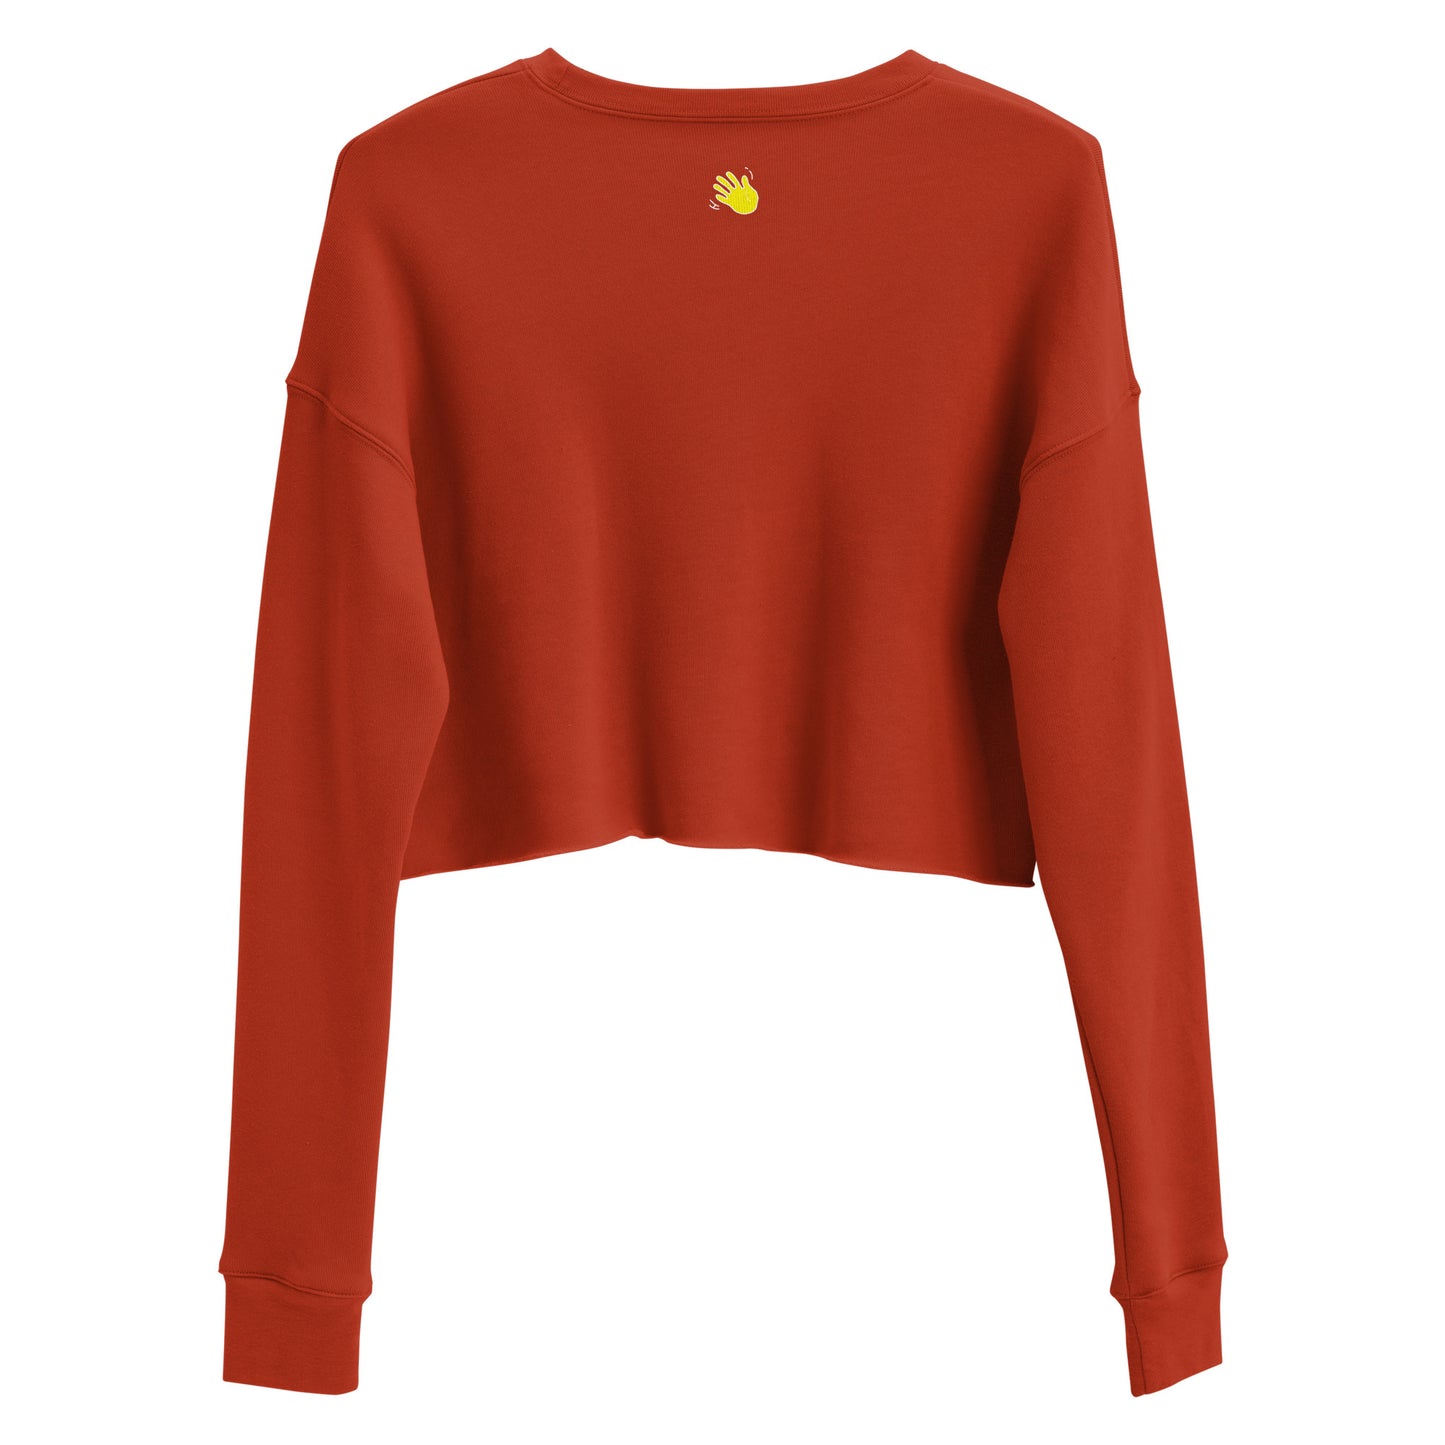 Hi Cropped Sweatshirt from Happy interactions in Red Piacere — Pleased to meet you in Italian